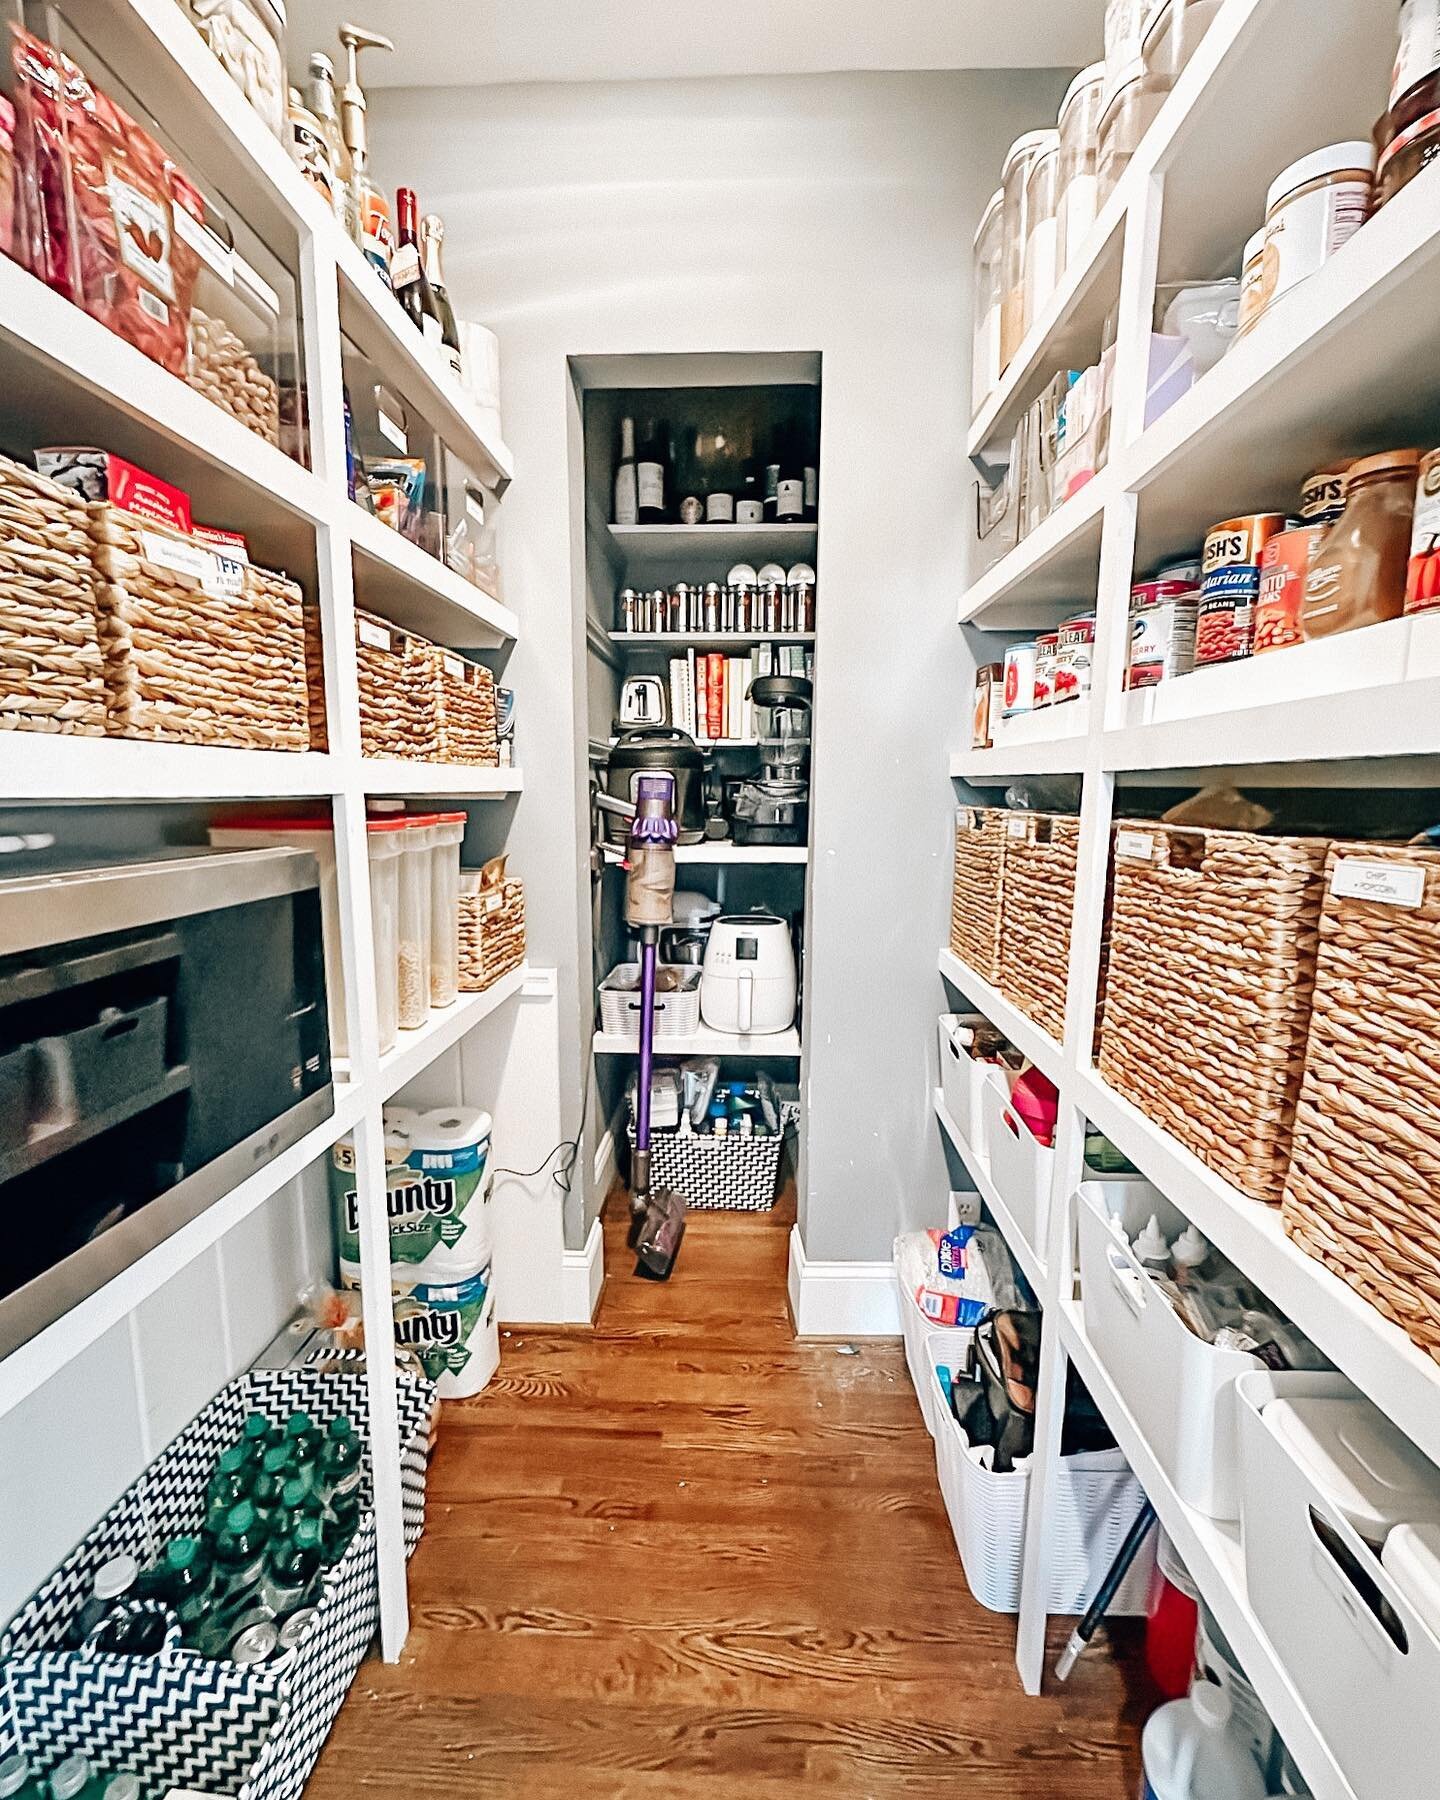 never let great storage go to waste - with the right product, even the trickiest spaces can be functional! 

#pantryorganization #organization #getorganized #tidy